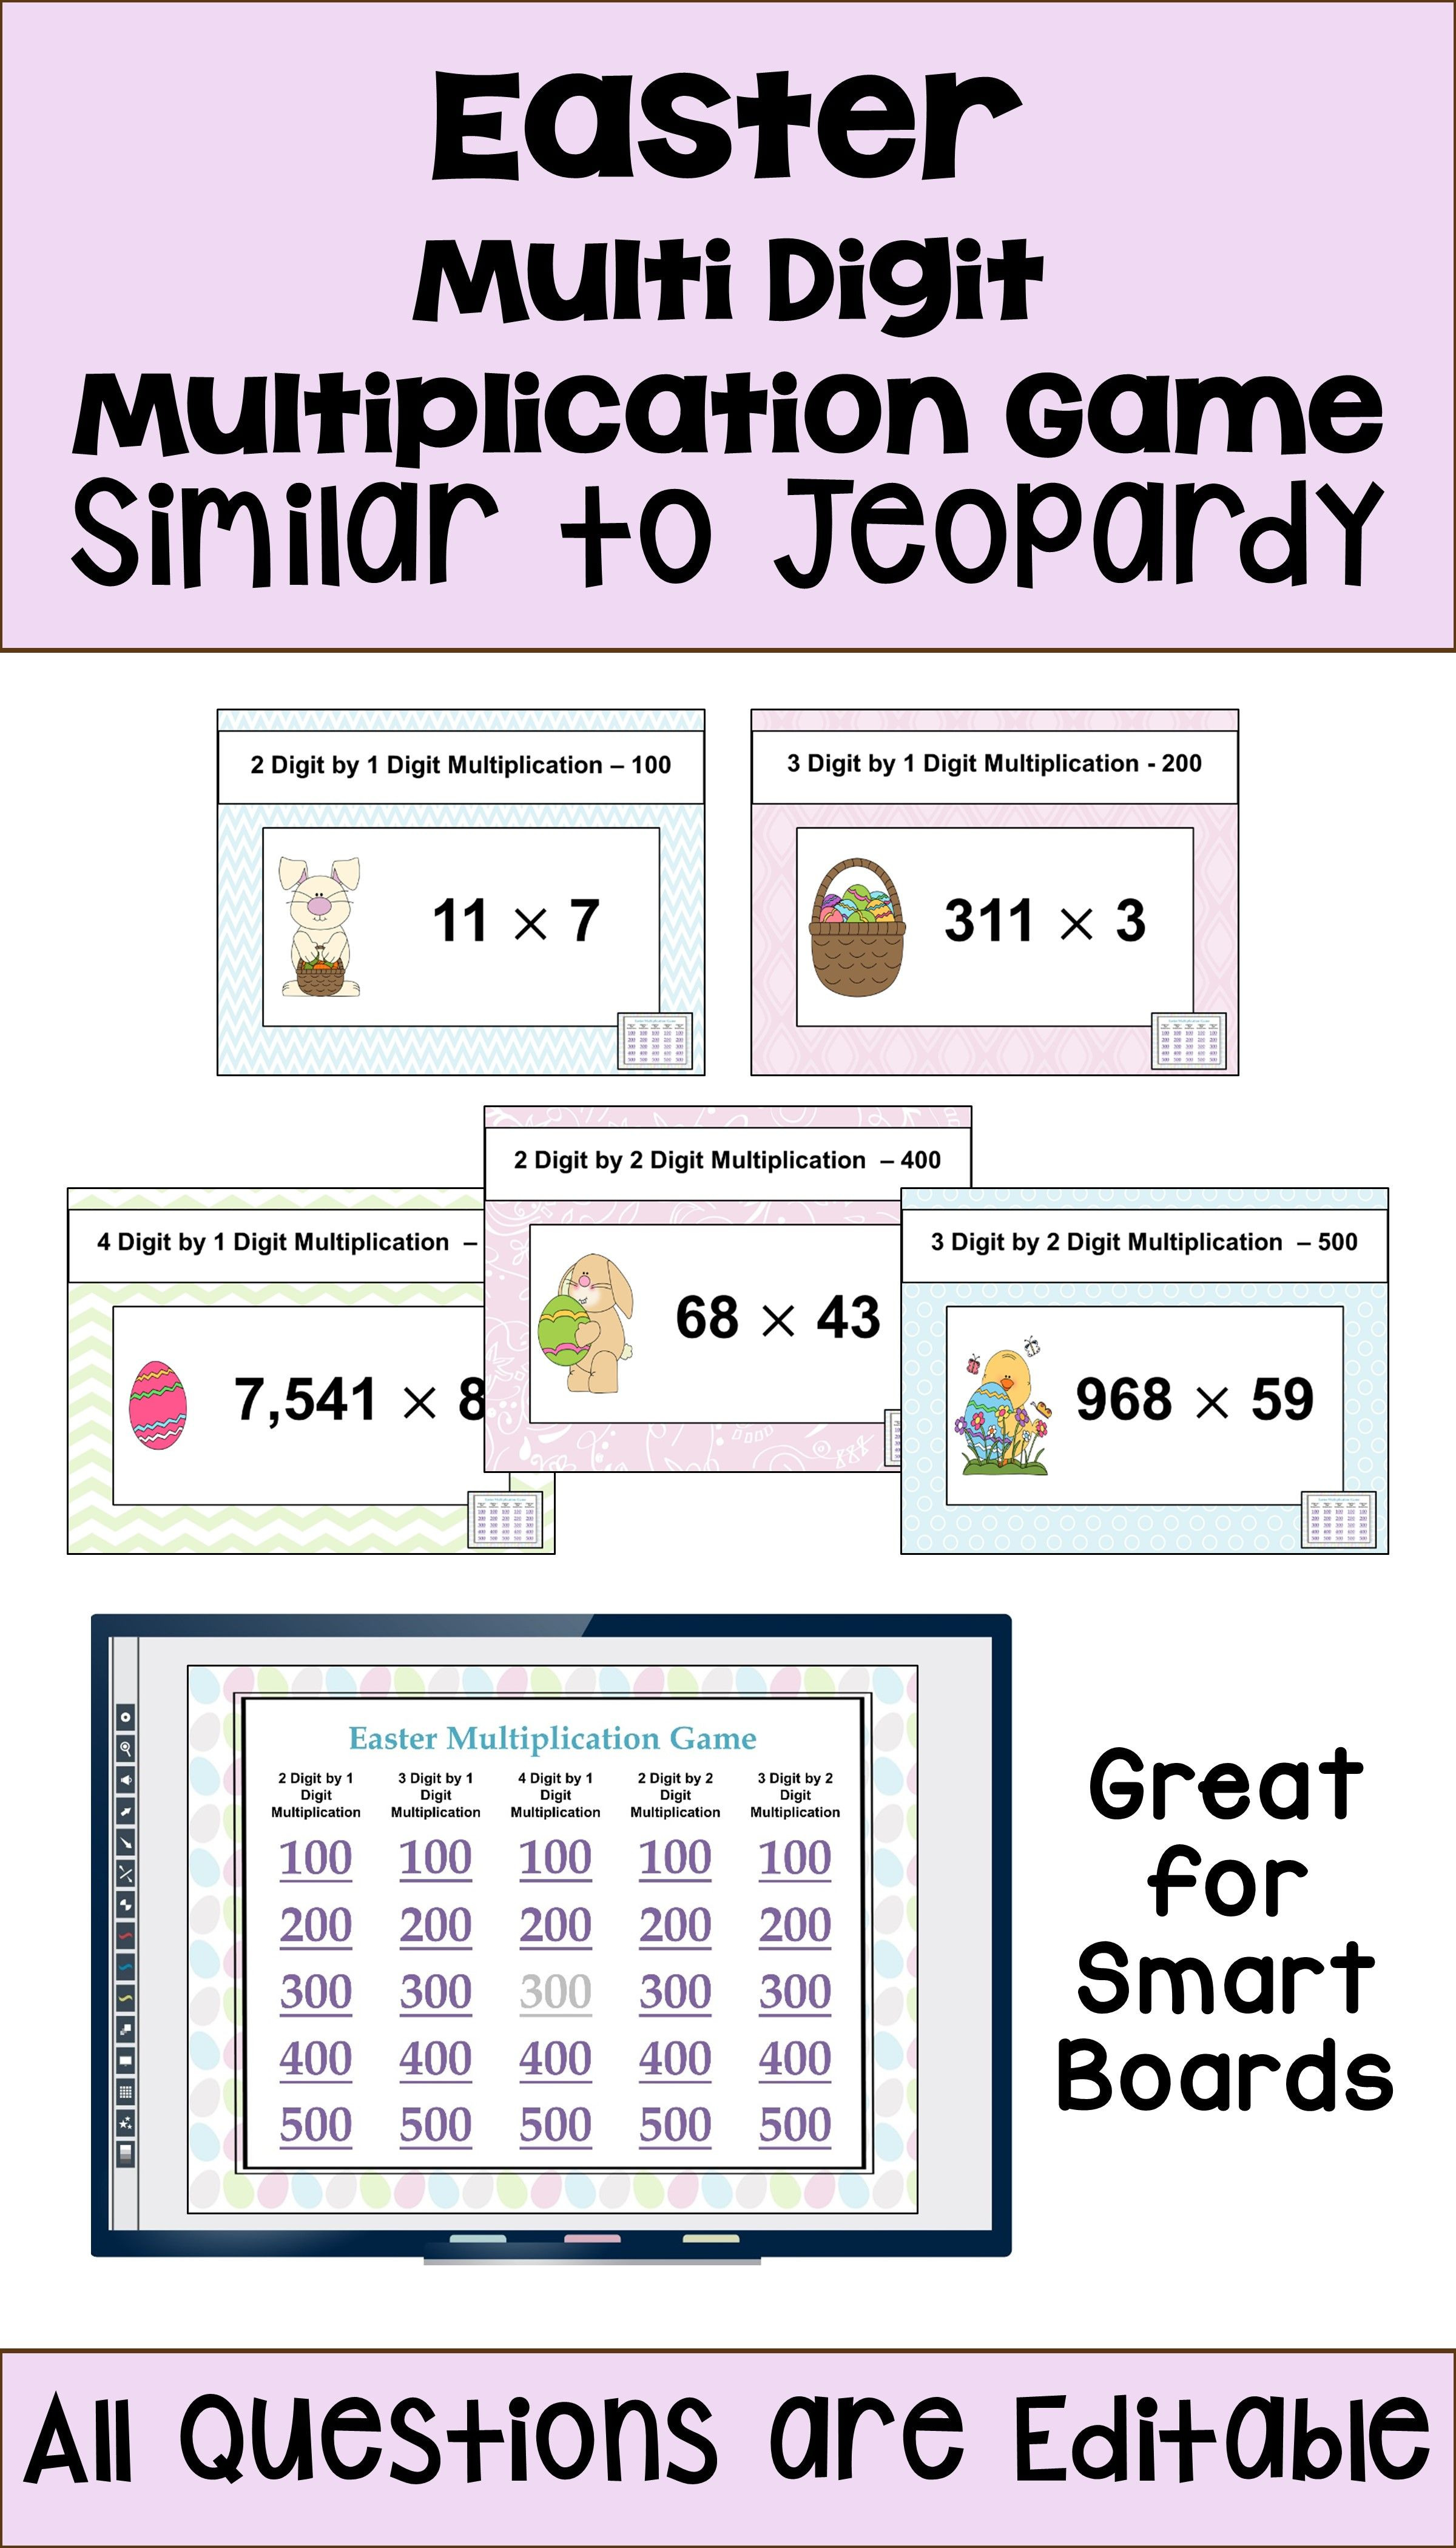 5th Grade Jeopardy Math Easter Multiplication Game Similar to Jeopardy